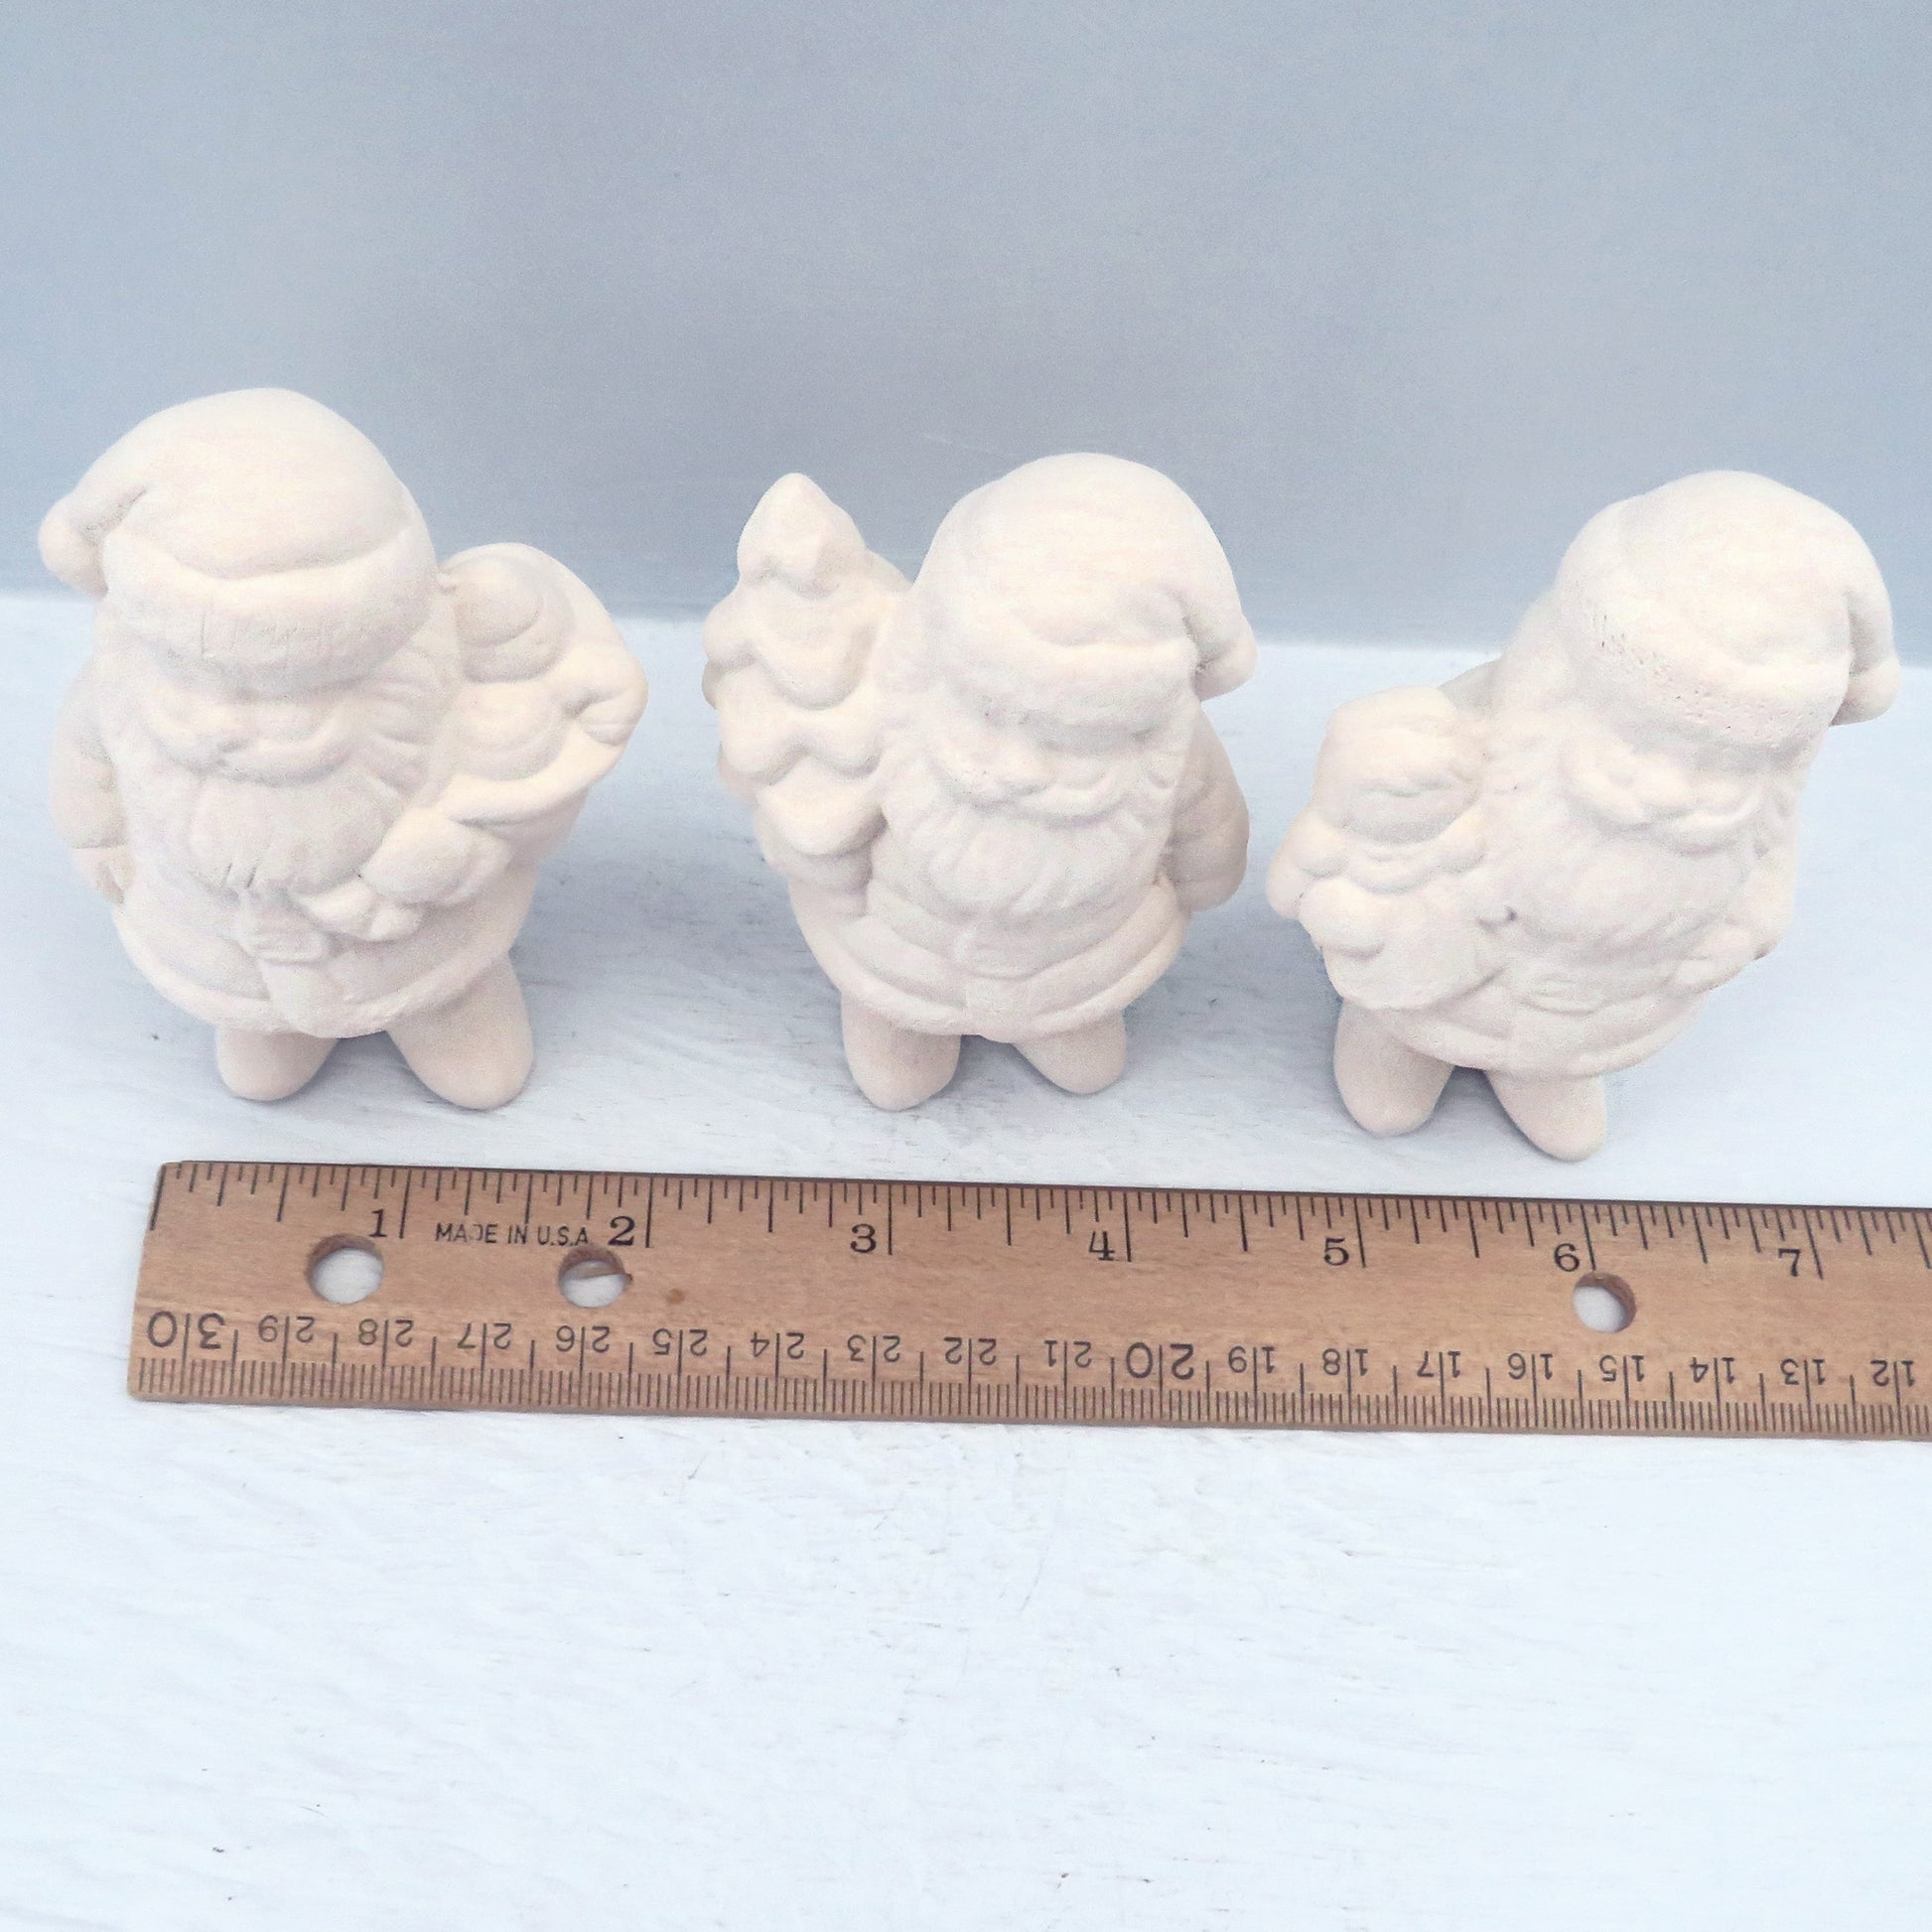 Unpainted bisque santa claus figurines standing near a ruler showing them to be approximately 1 1/2 to 1 3/4 inches wide